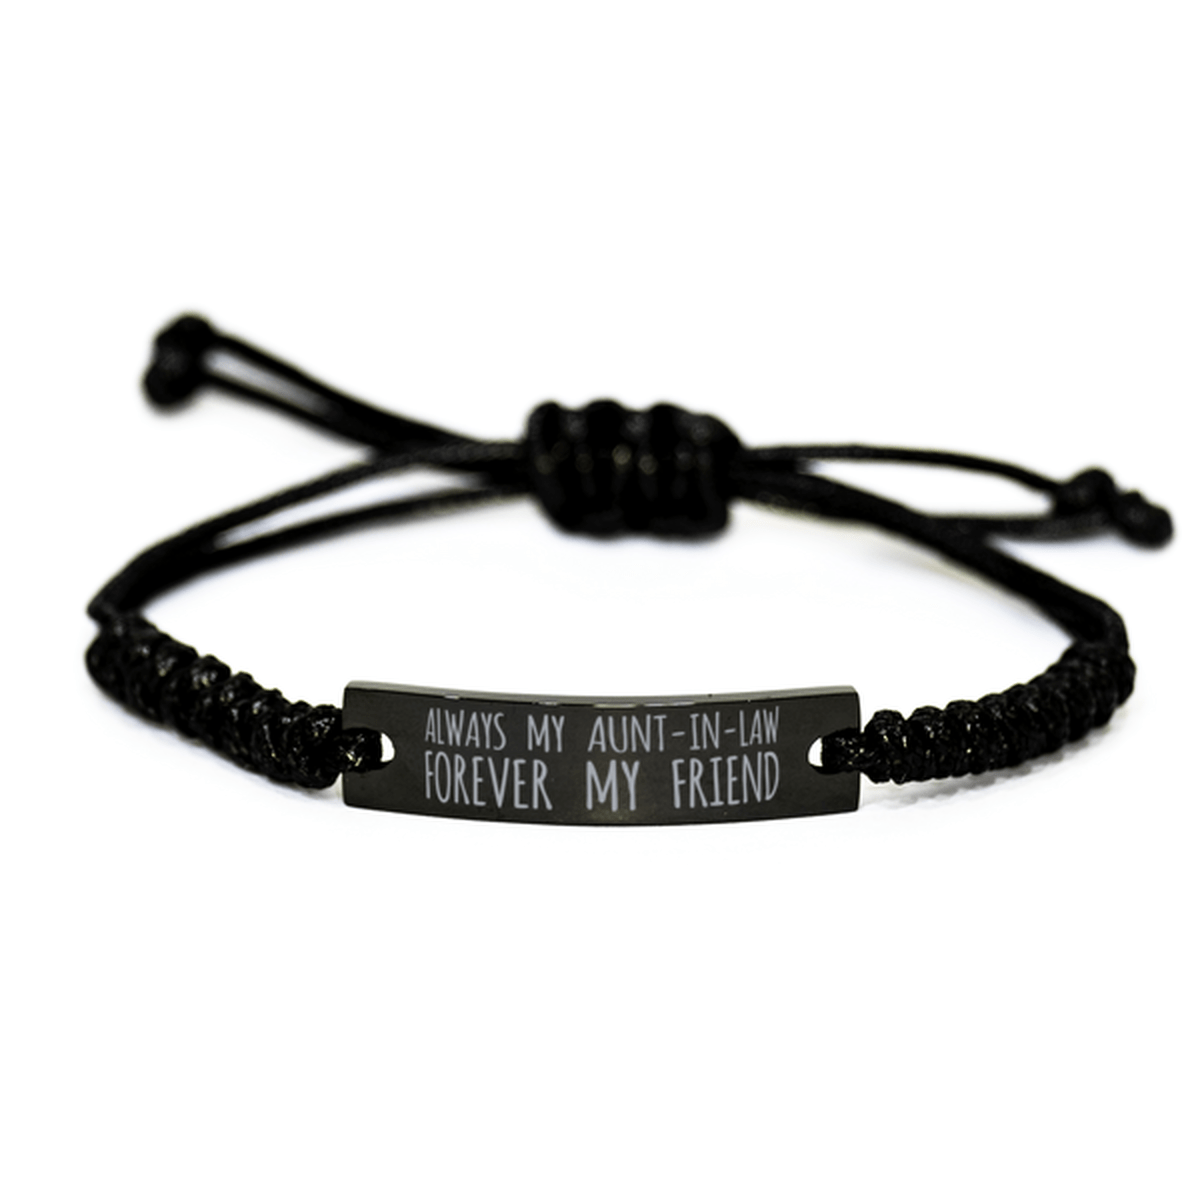 Inspirational Aunt-In-Law Black Rope Bracelet, Always My Aunt-In-Law Forever My Friend, Best Birthday Gifts For Family